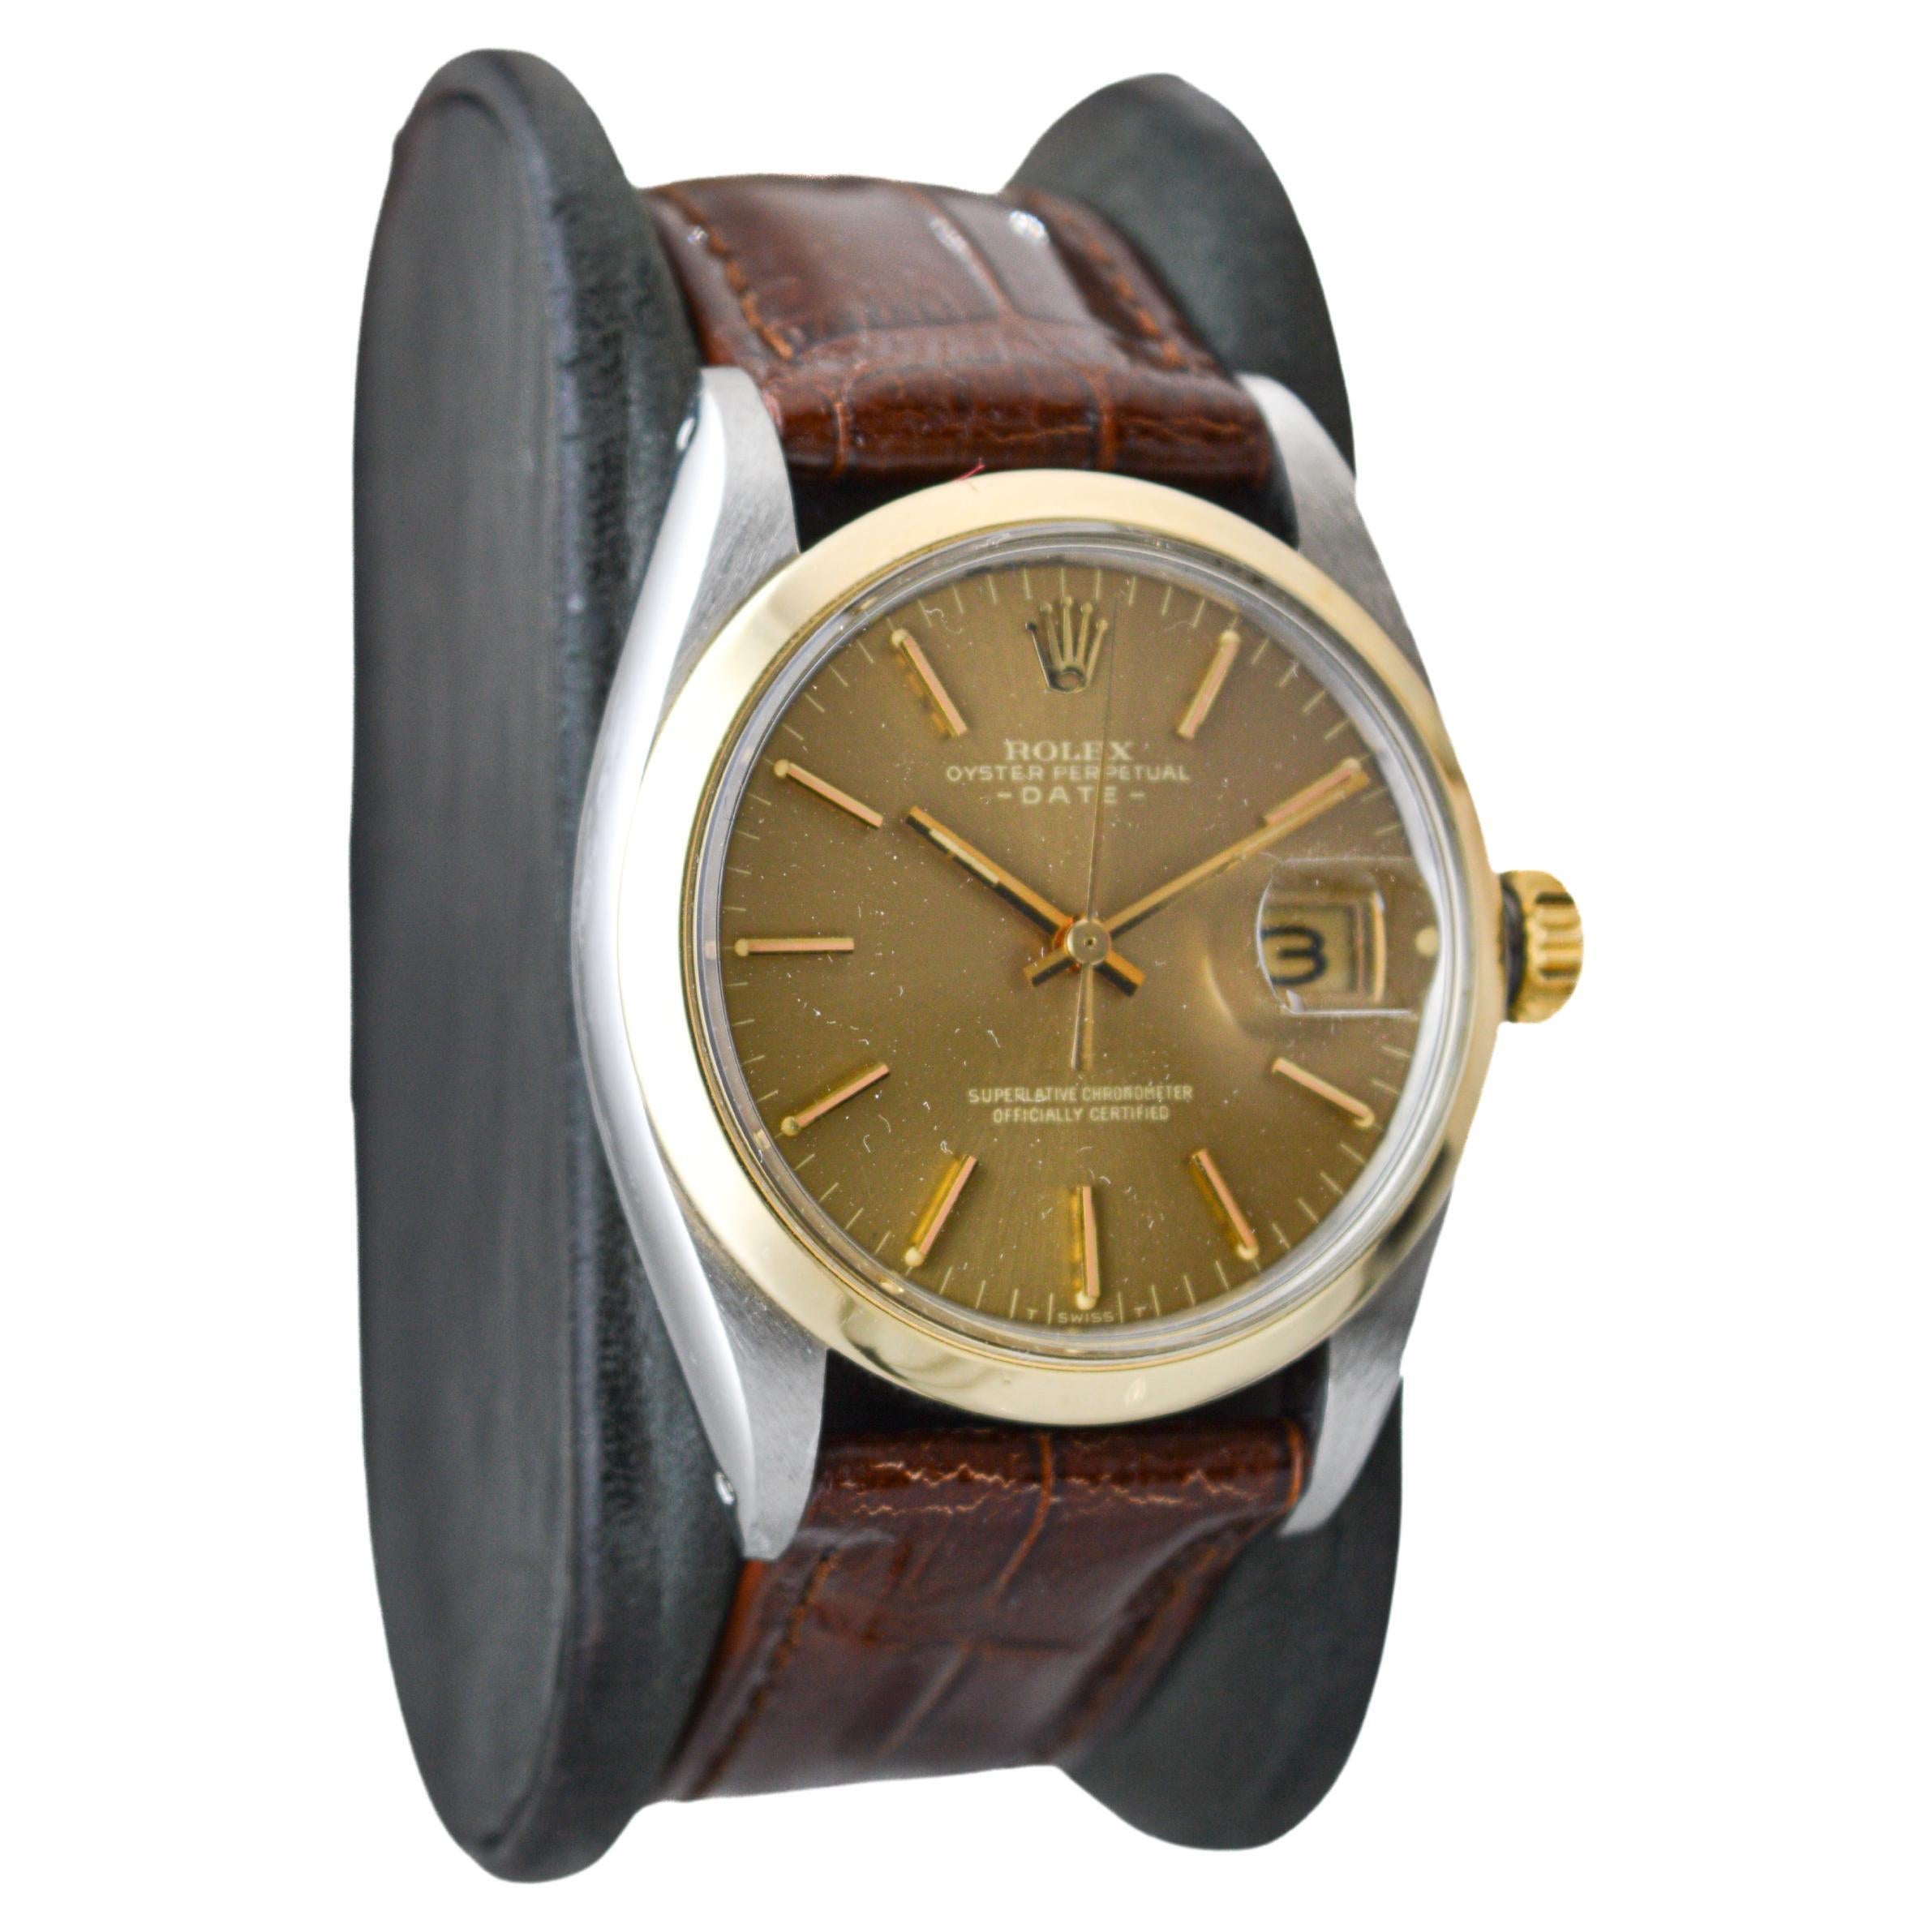 FACTORY / HOUSE: Rolex Watch Company
STYLE / REFERENCE: Oyster Perpetual Date / Reference 1500
METAL / MATERIAL: Two Tone / 14Kt. & Stainless Steel 
CIRCA / YEAR: 1960's
DIMENSIONS / SIZE: Length 43mm X Diameter 35mm
MOVEMENT / CALIBER: Perpetual